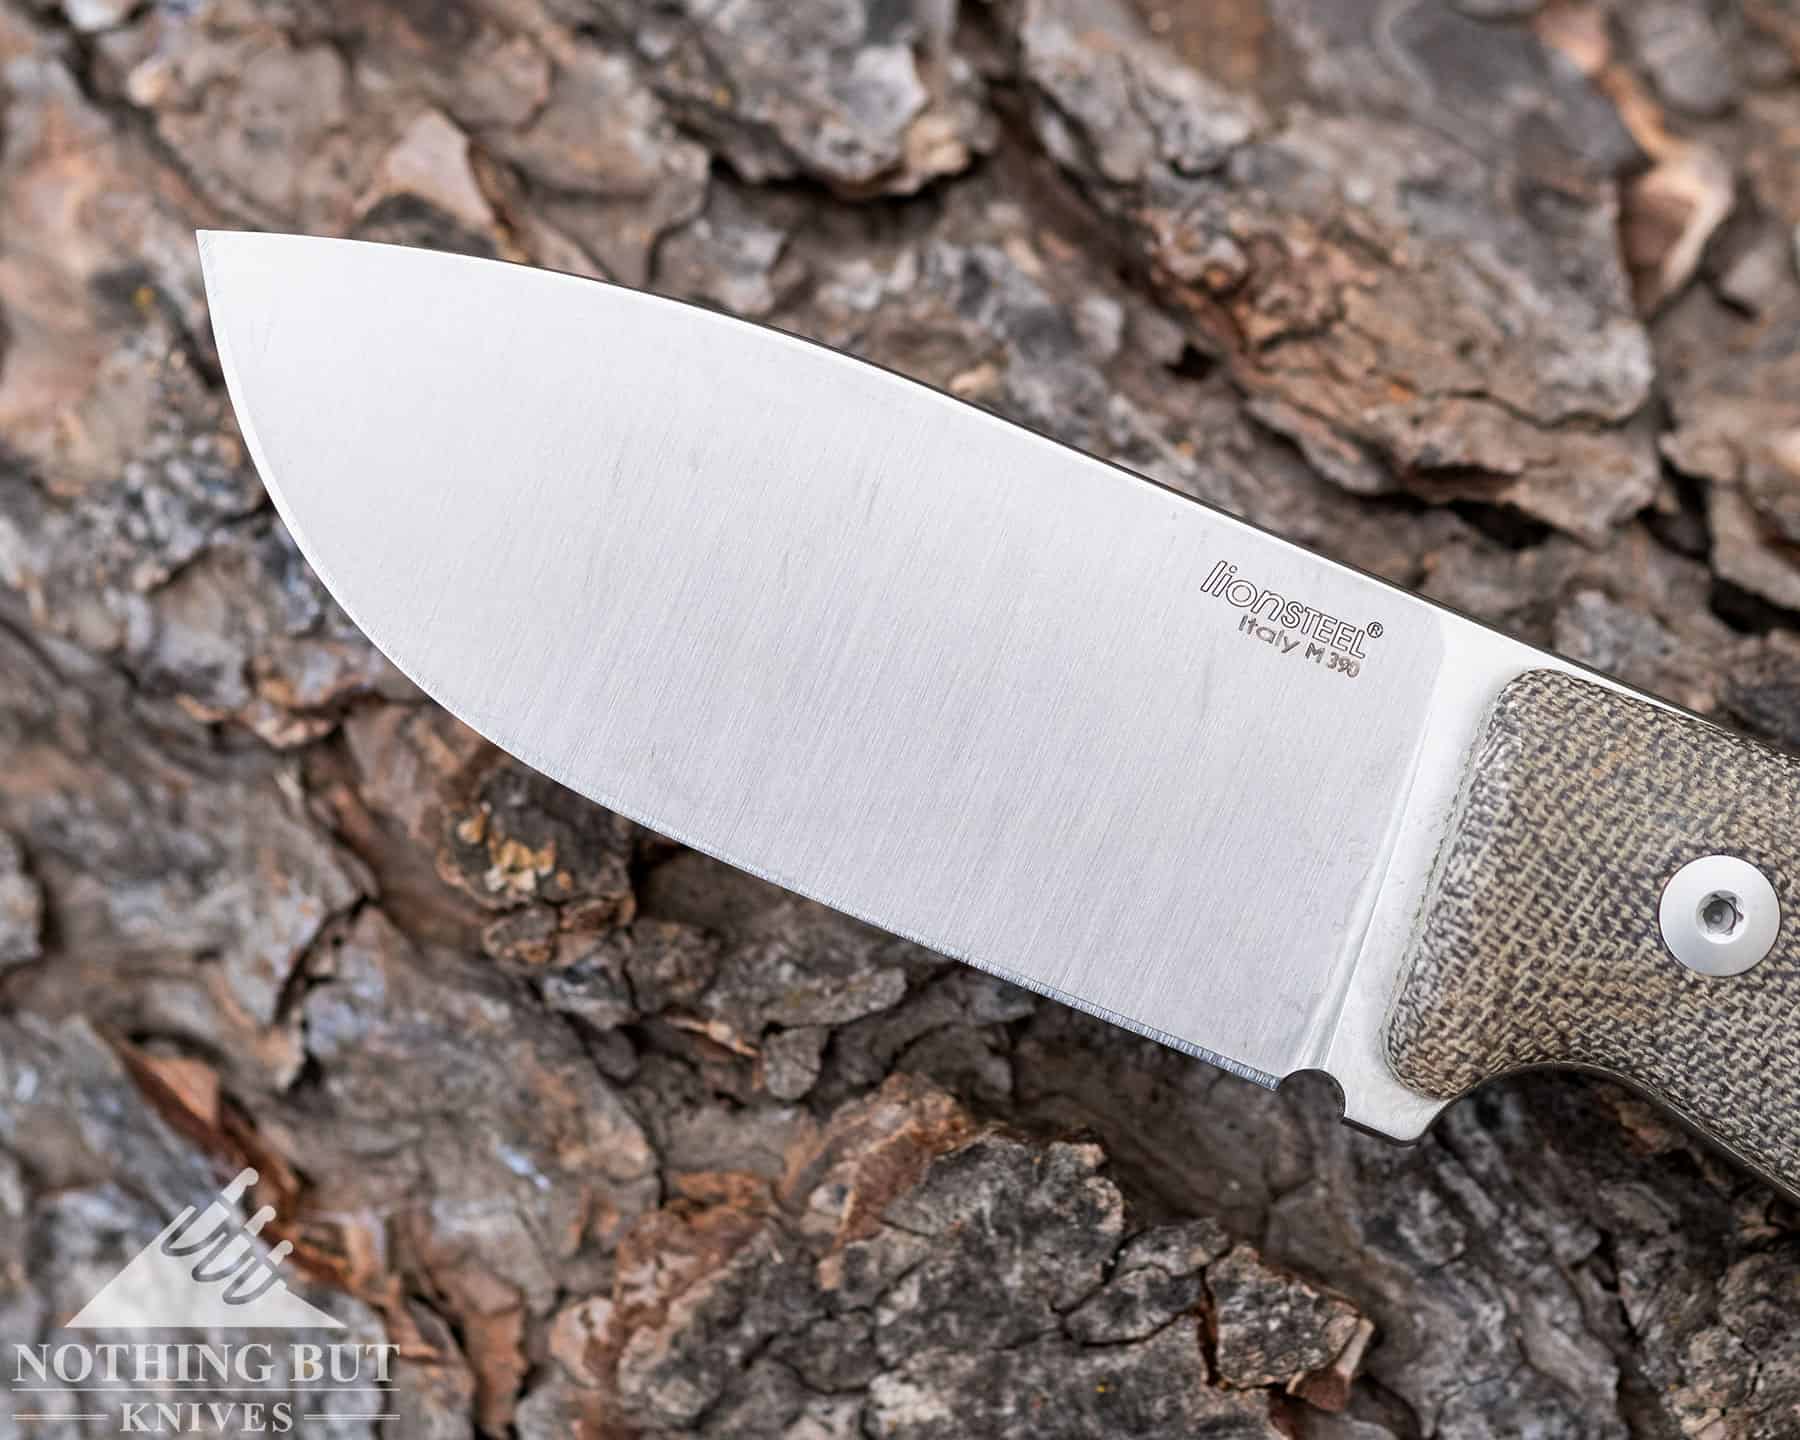 The Lionsteel M2M blade is tall and made of Bohler M390 steel.